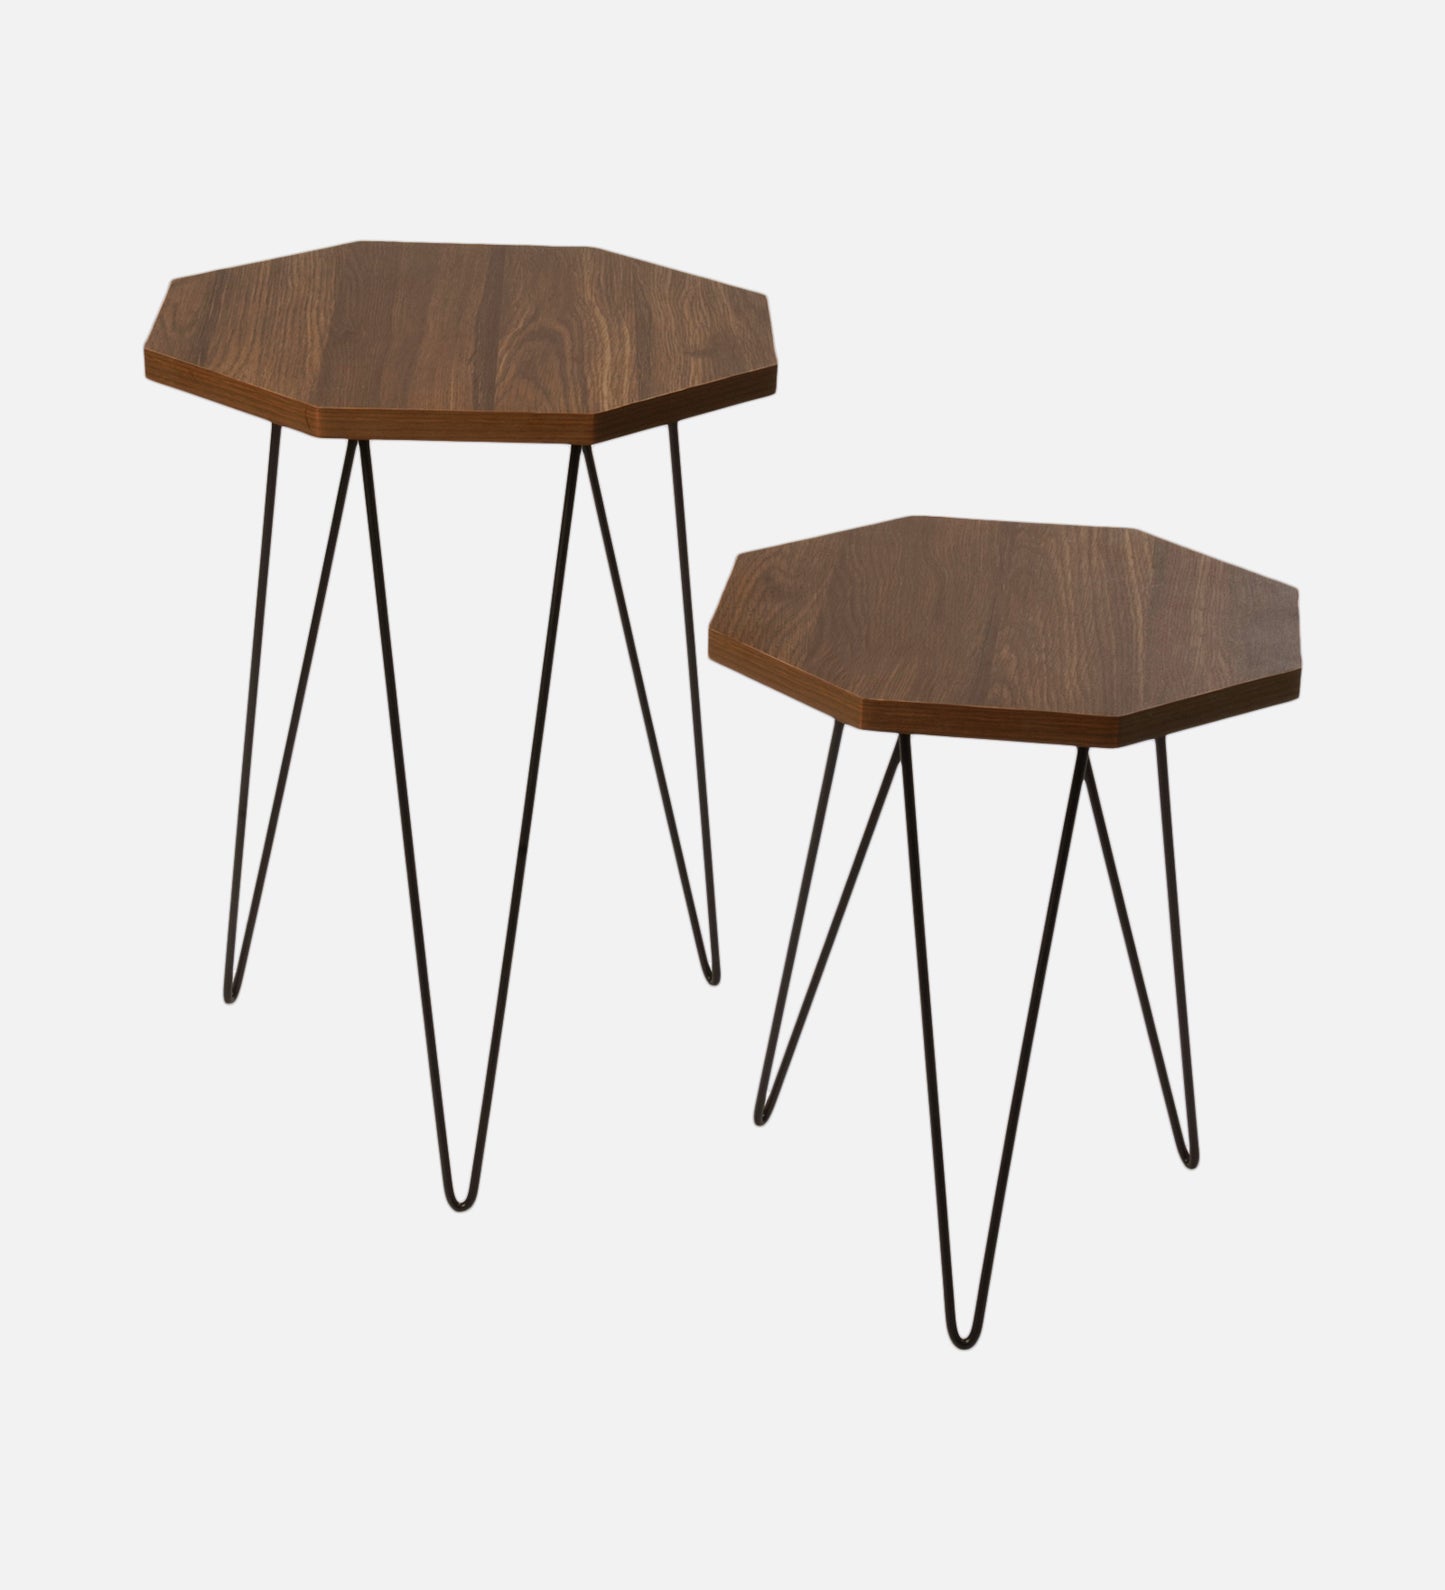 Walnut Hues Octagon Nesting Tables with Hairpin Legs, Side Tables, Wooden Tables, Living Room Decor by A Tiny Mistake